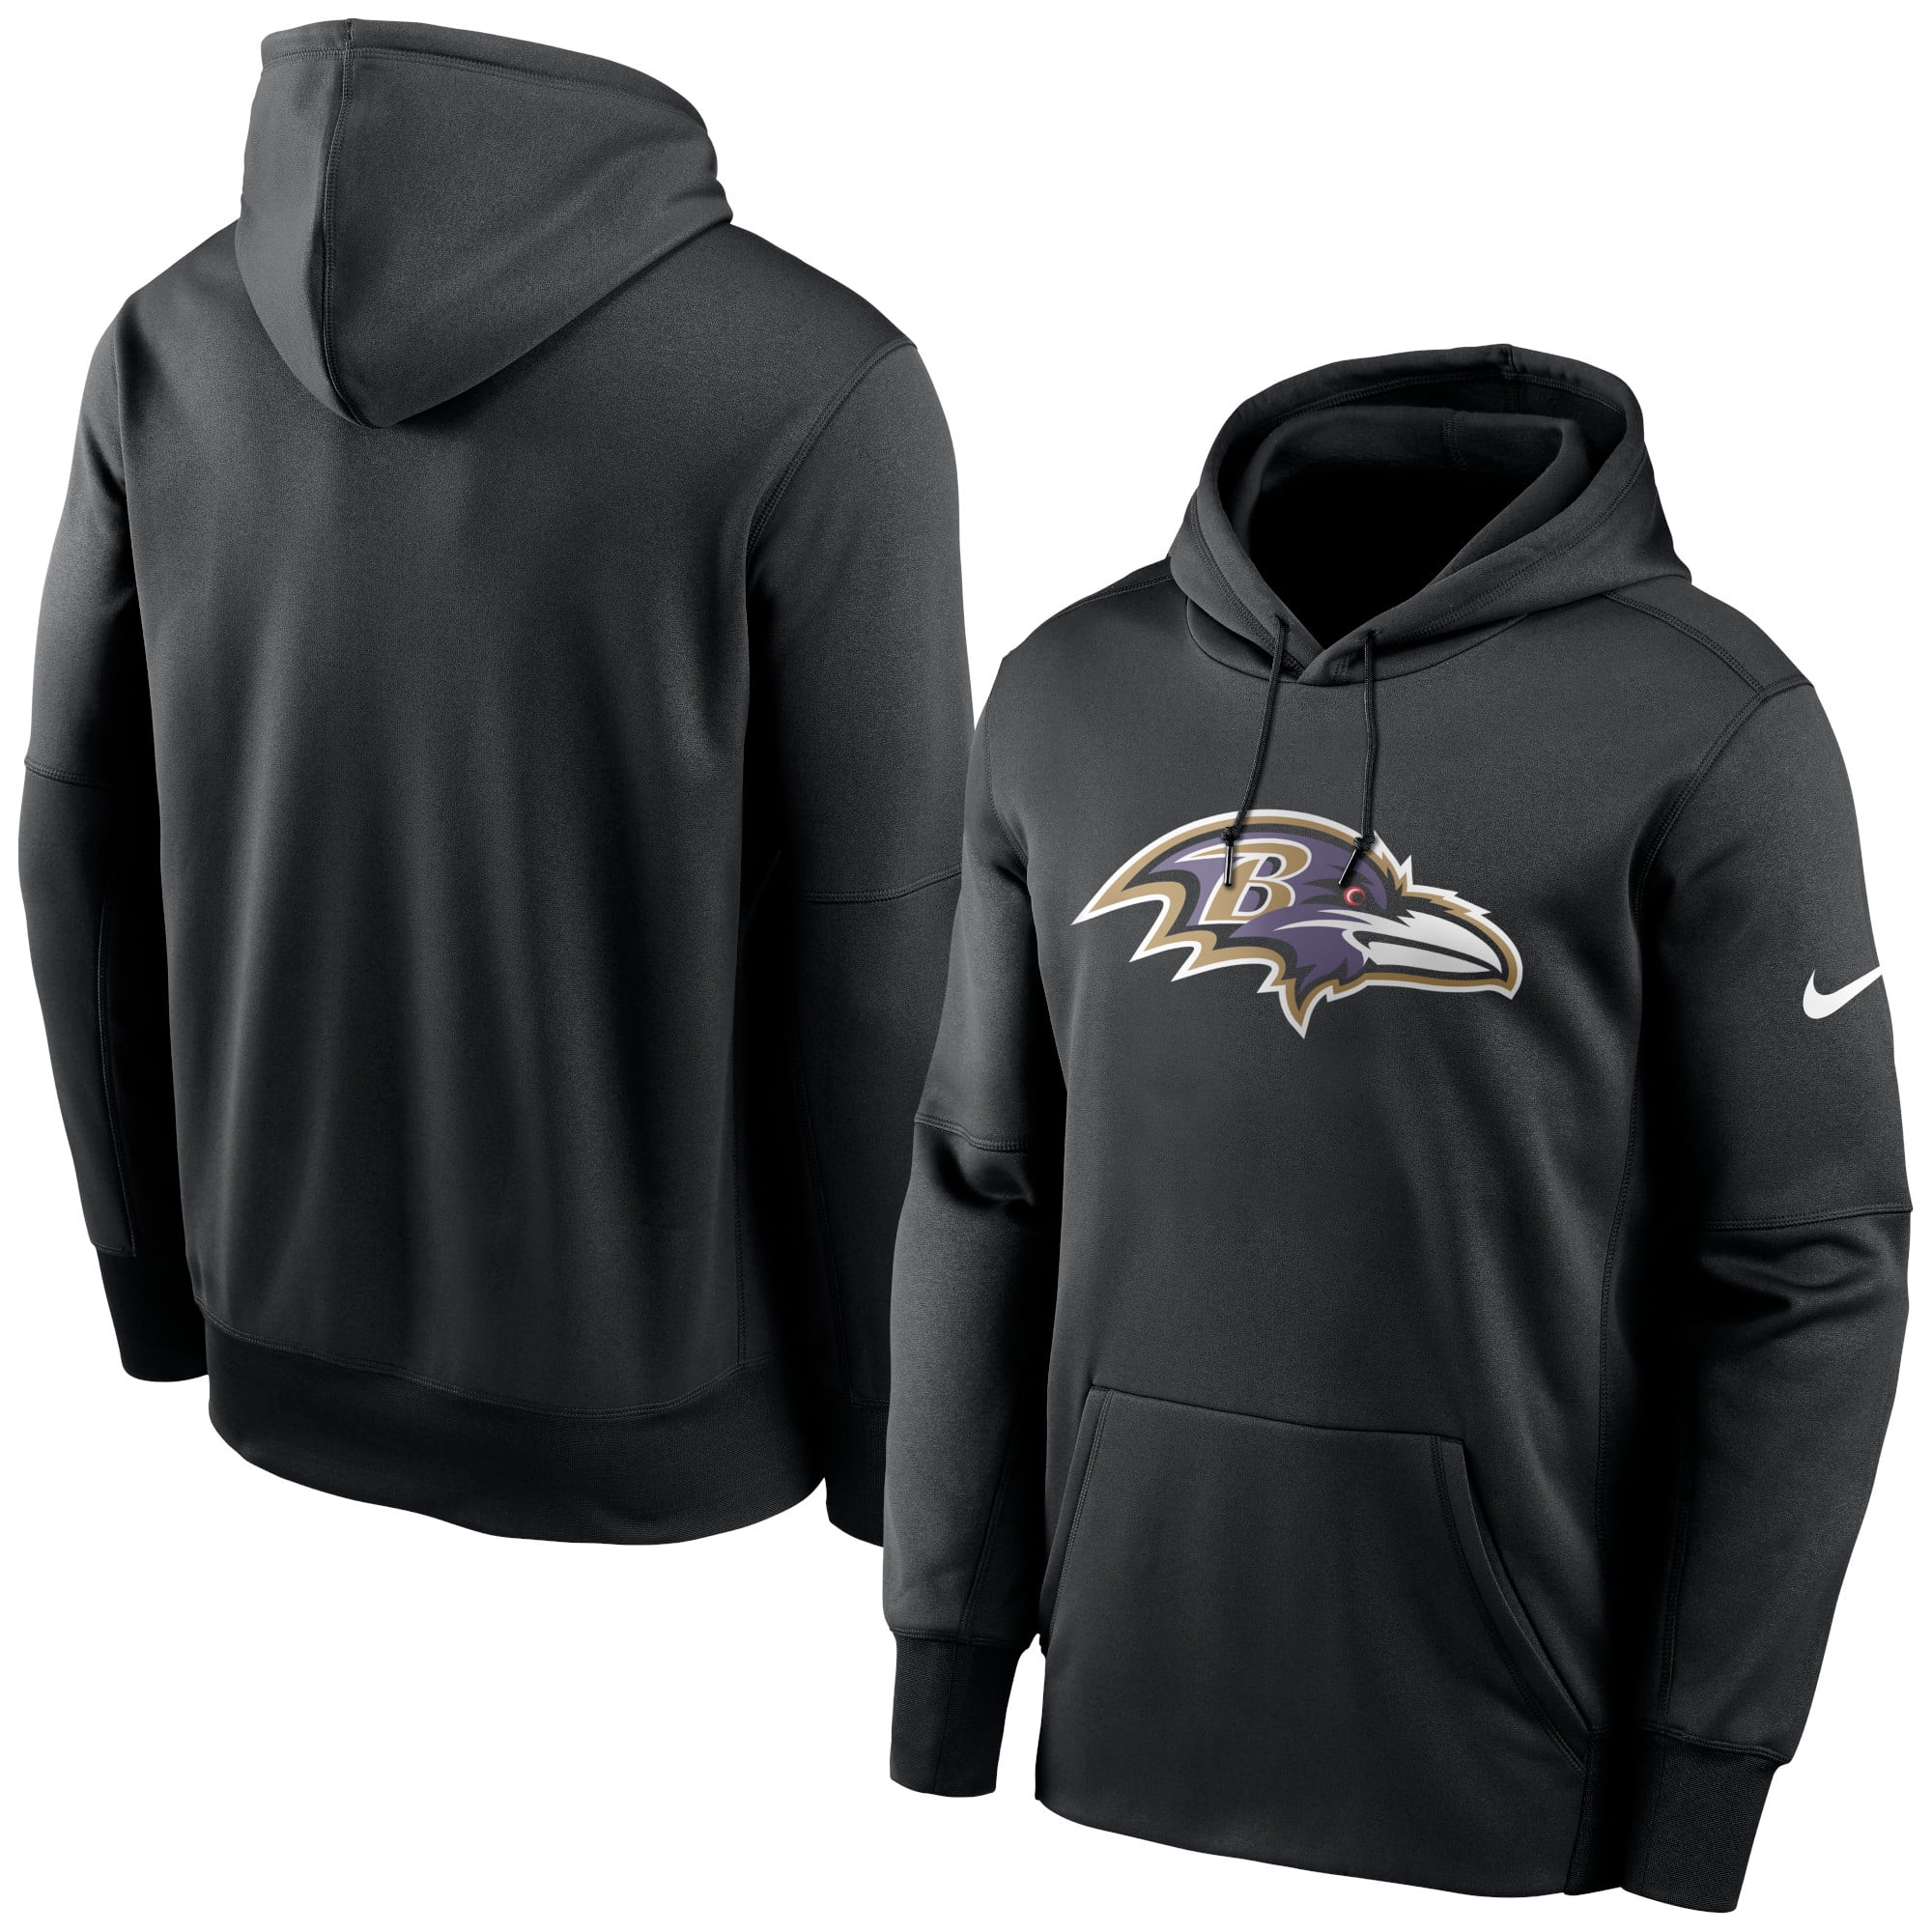 Color : Gray, Size : S FunShop For Ravens Team Hooded Sweatshirt Mens Hooded Long Sleeve Jersey American Football Jersey Pullover Hoodies 